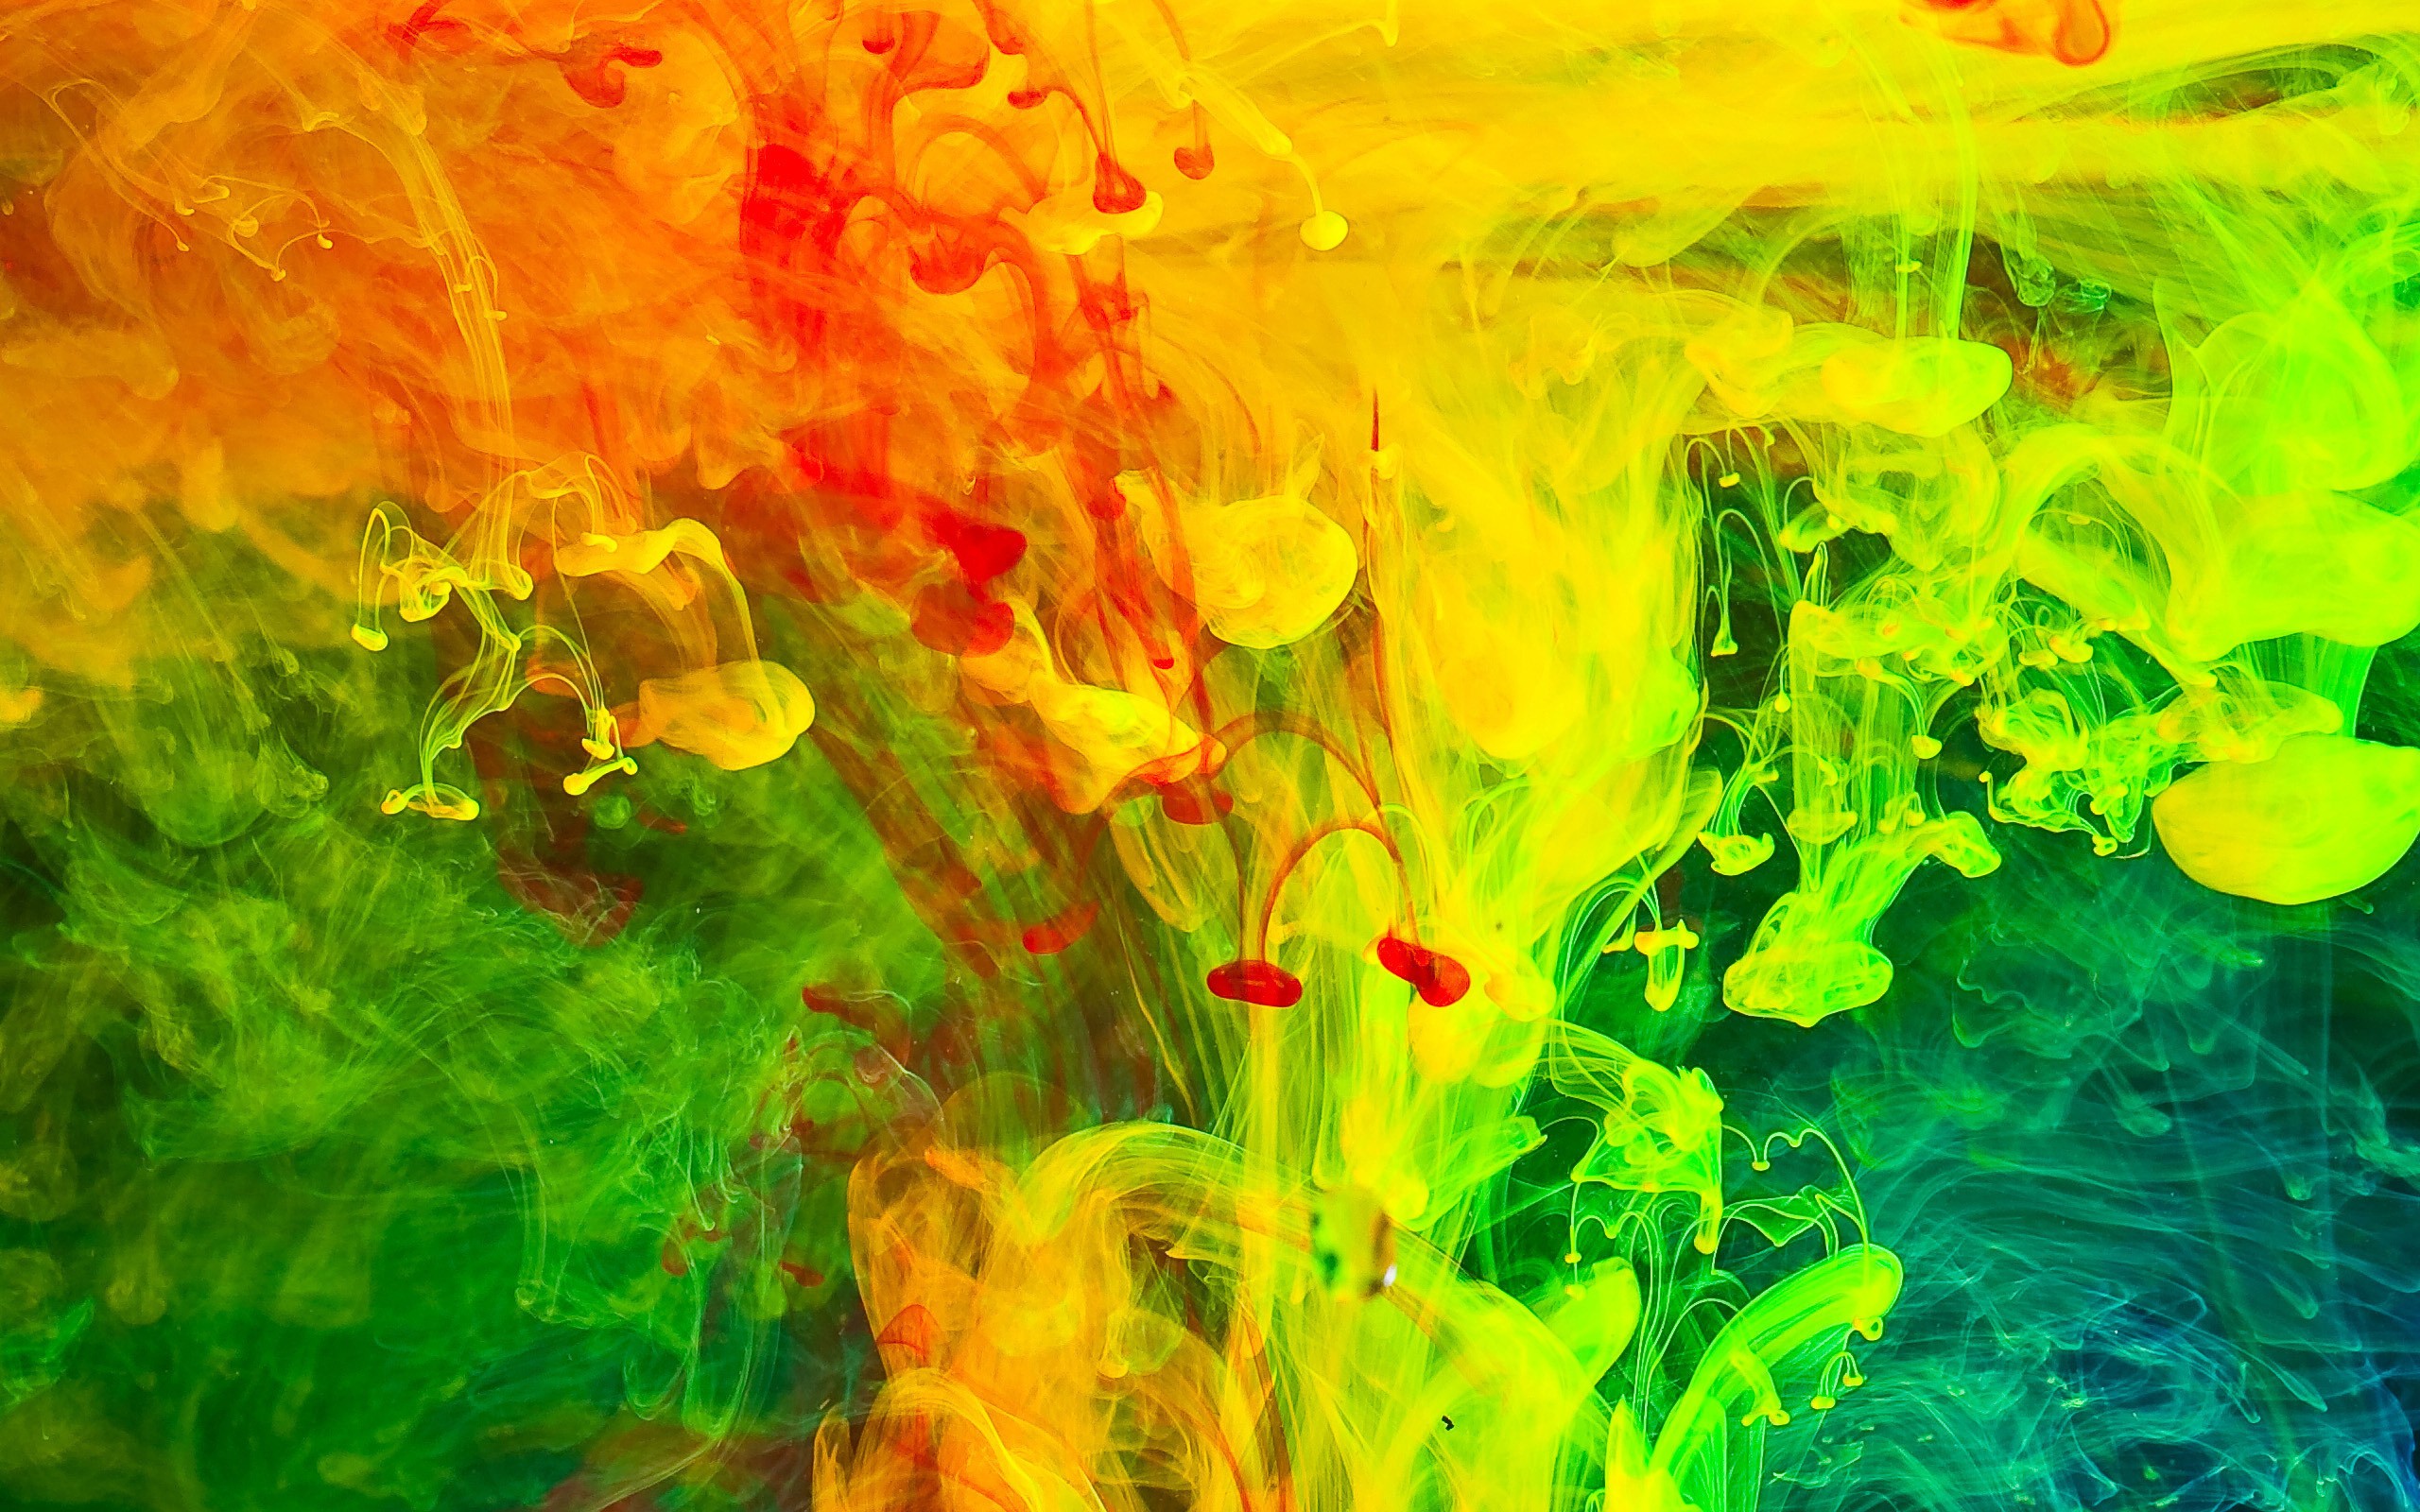 General 2560x1600 paint in water liquid abstract colorful artwork